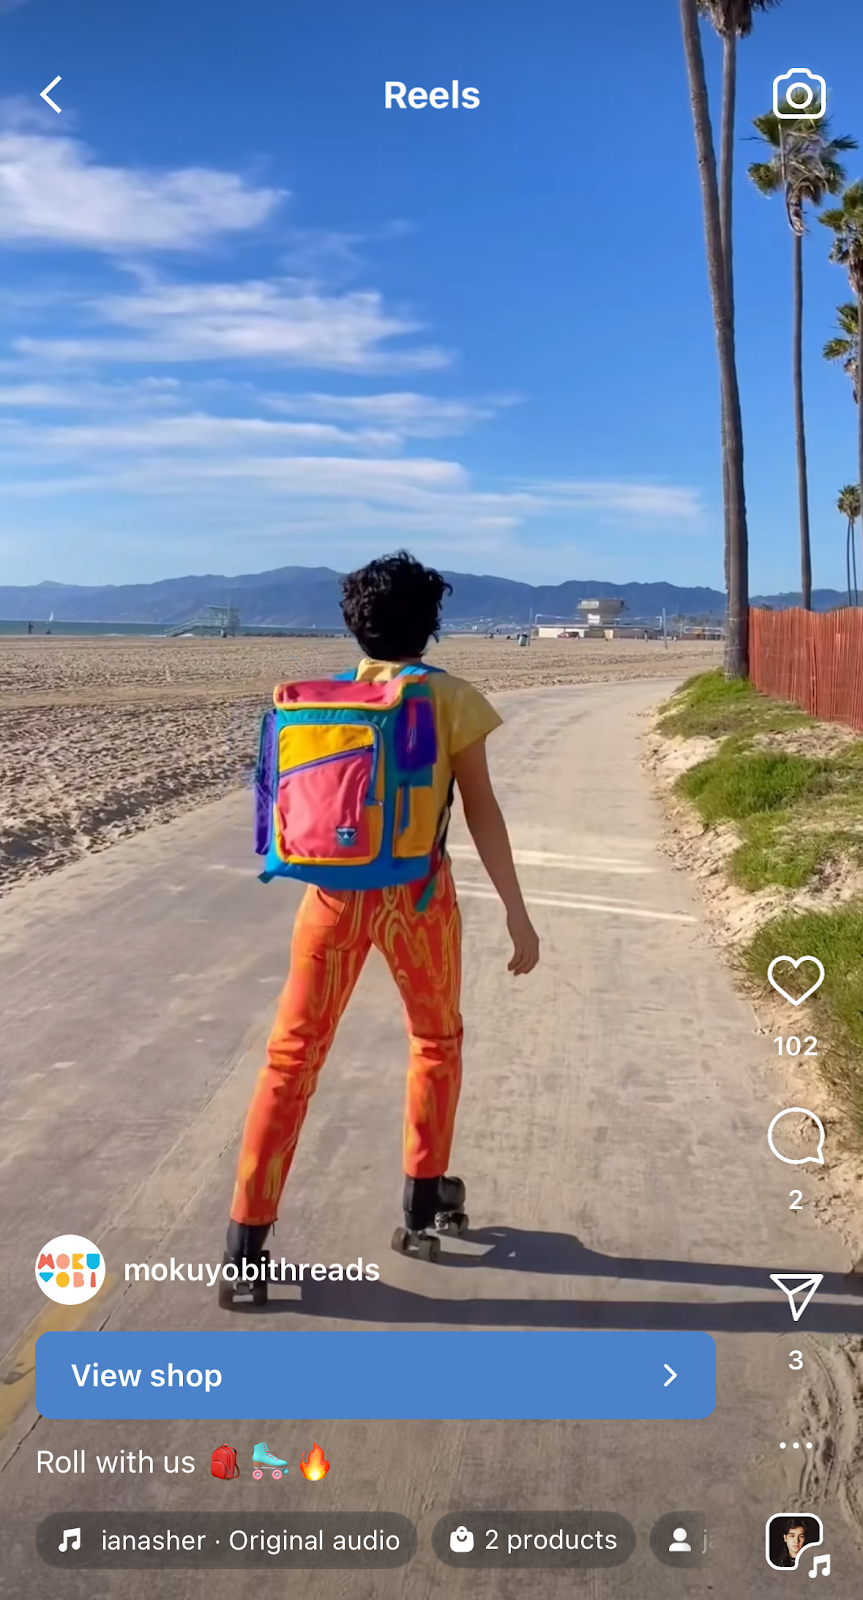 instagram reel of person in bright color clothing